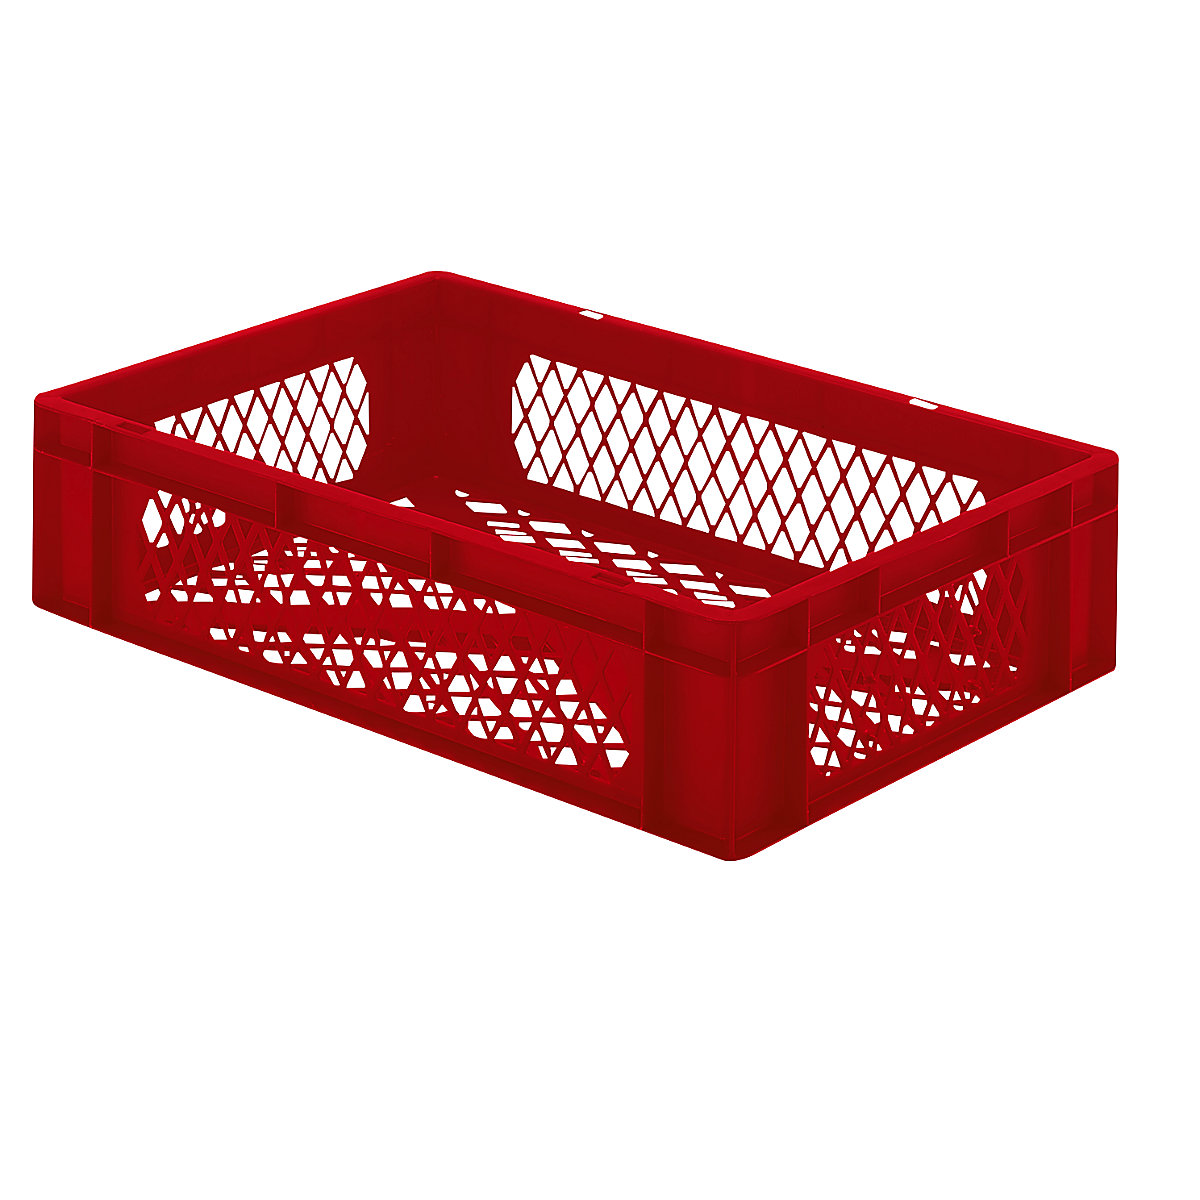 Euro stacking container, perforated walls and base, LxWxH 600 x 400 x 145 mm, red, pack of 5